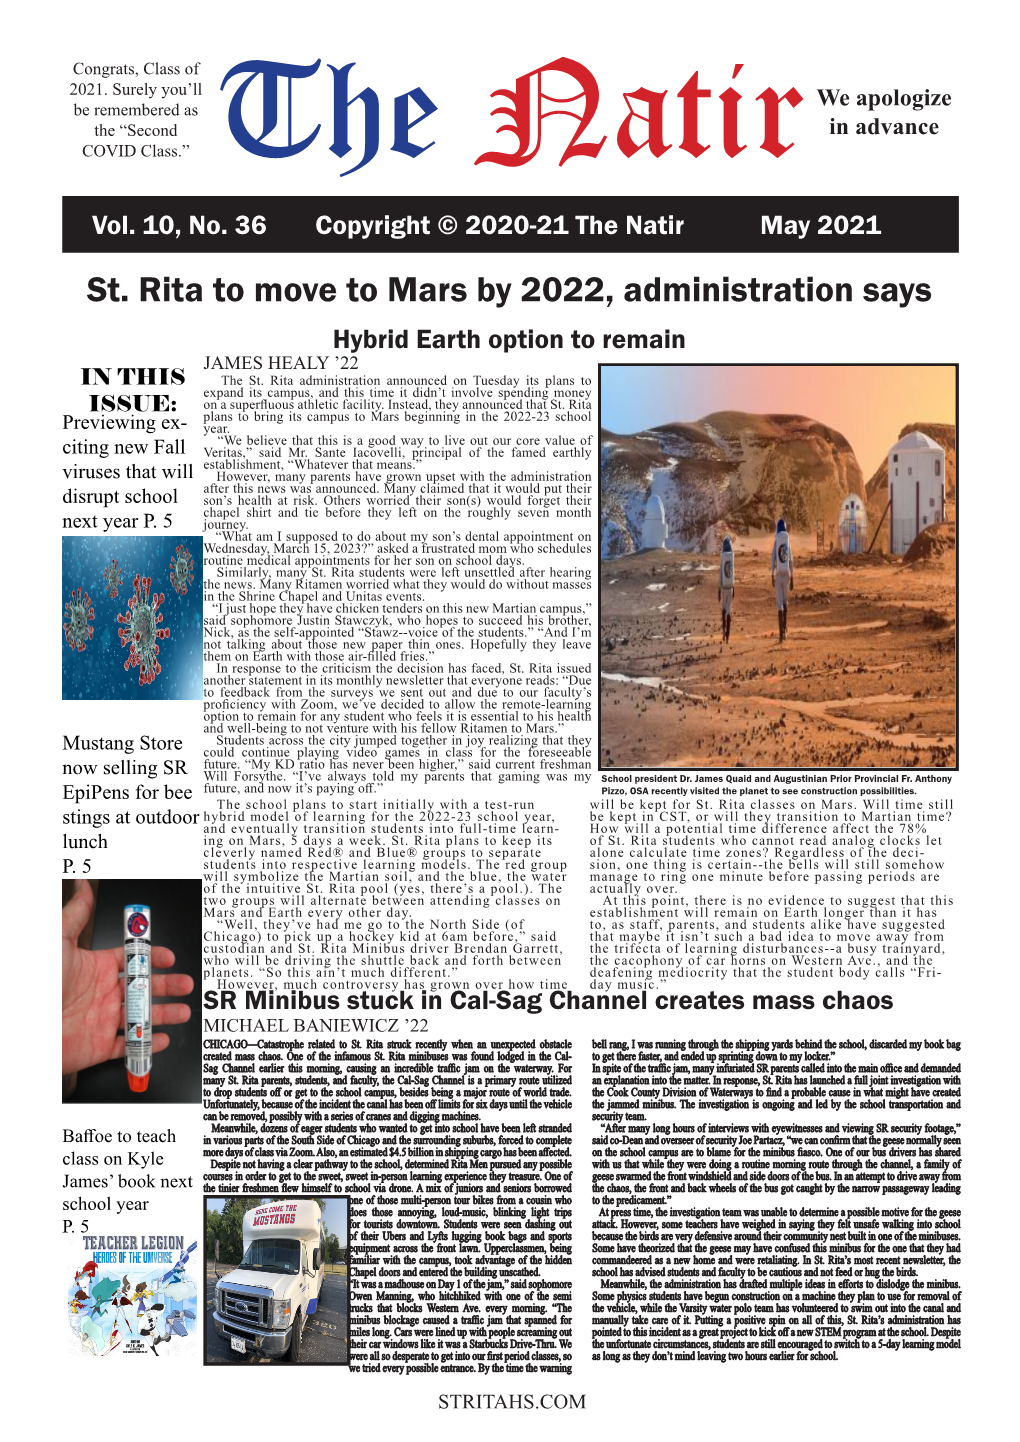 St. Rita to Move to Mars by 2022, Administration Says Hybrid Earth Option to Remain JAMES HEALY ’22 in THIS the St